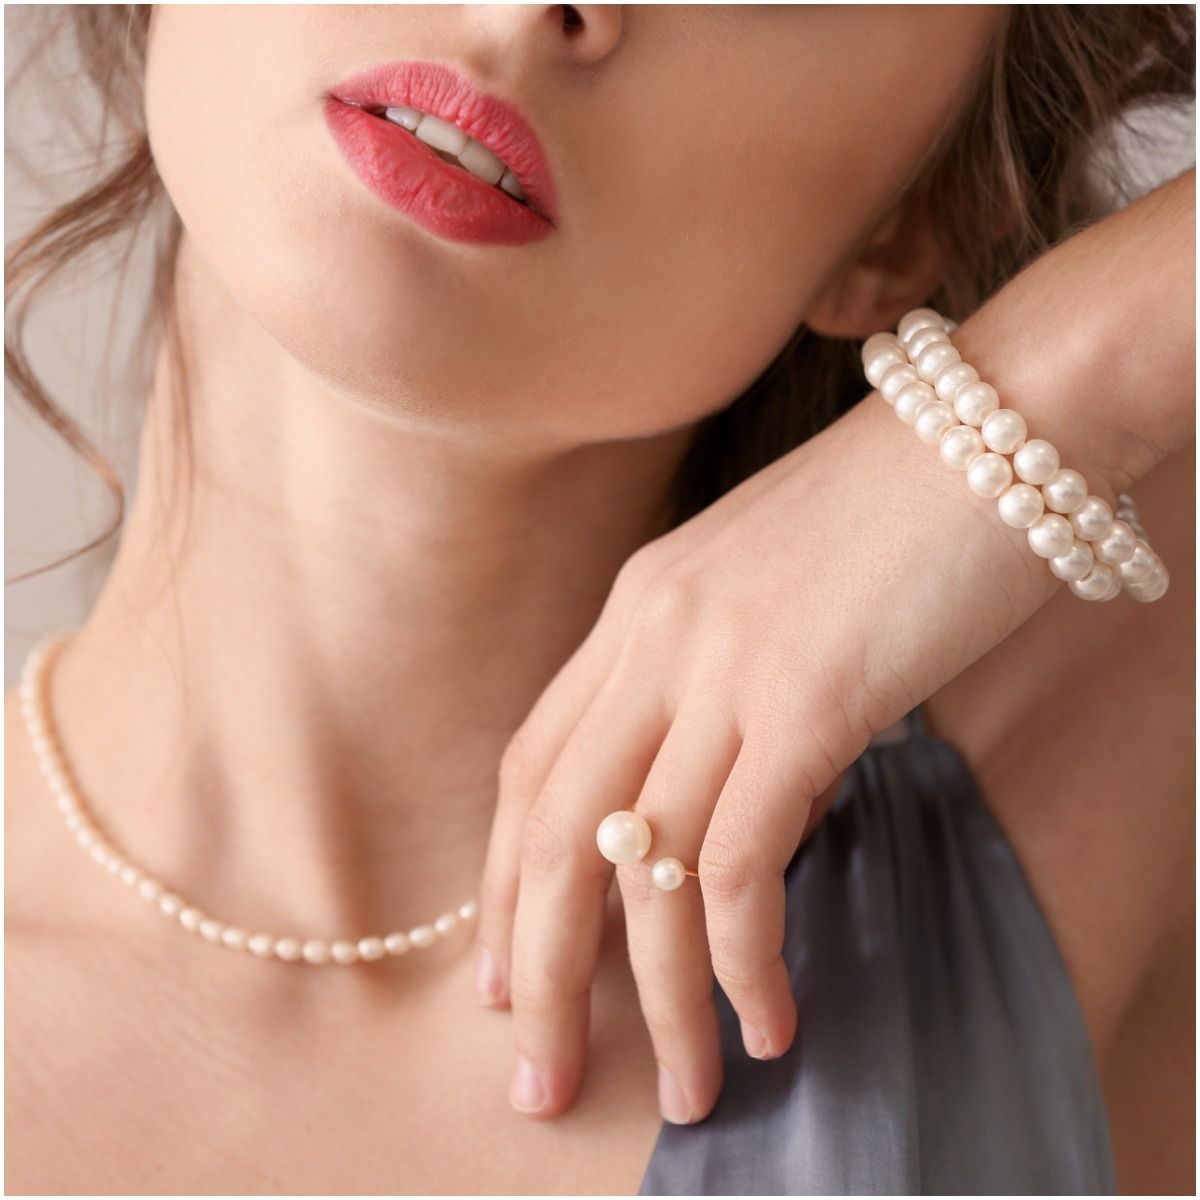 History Of Pearls